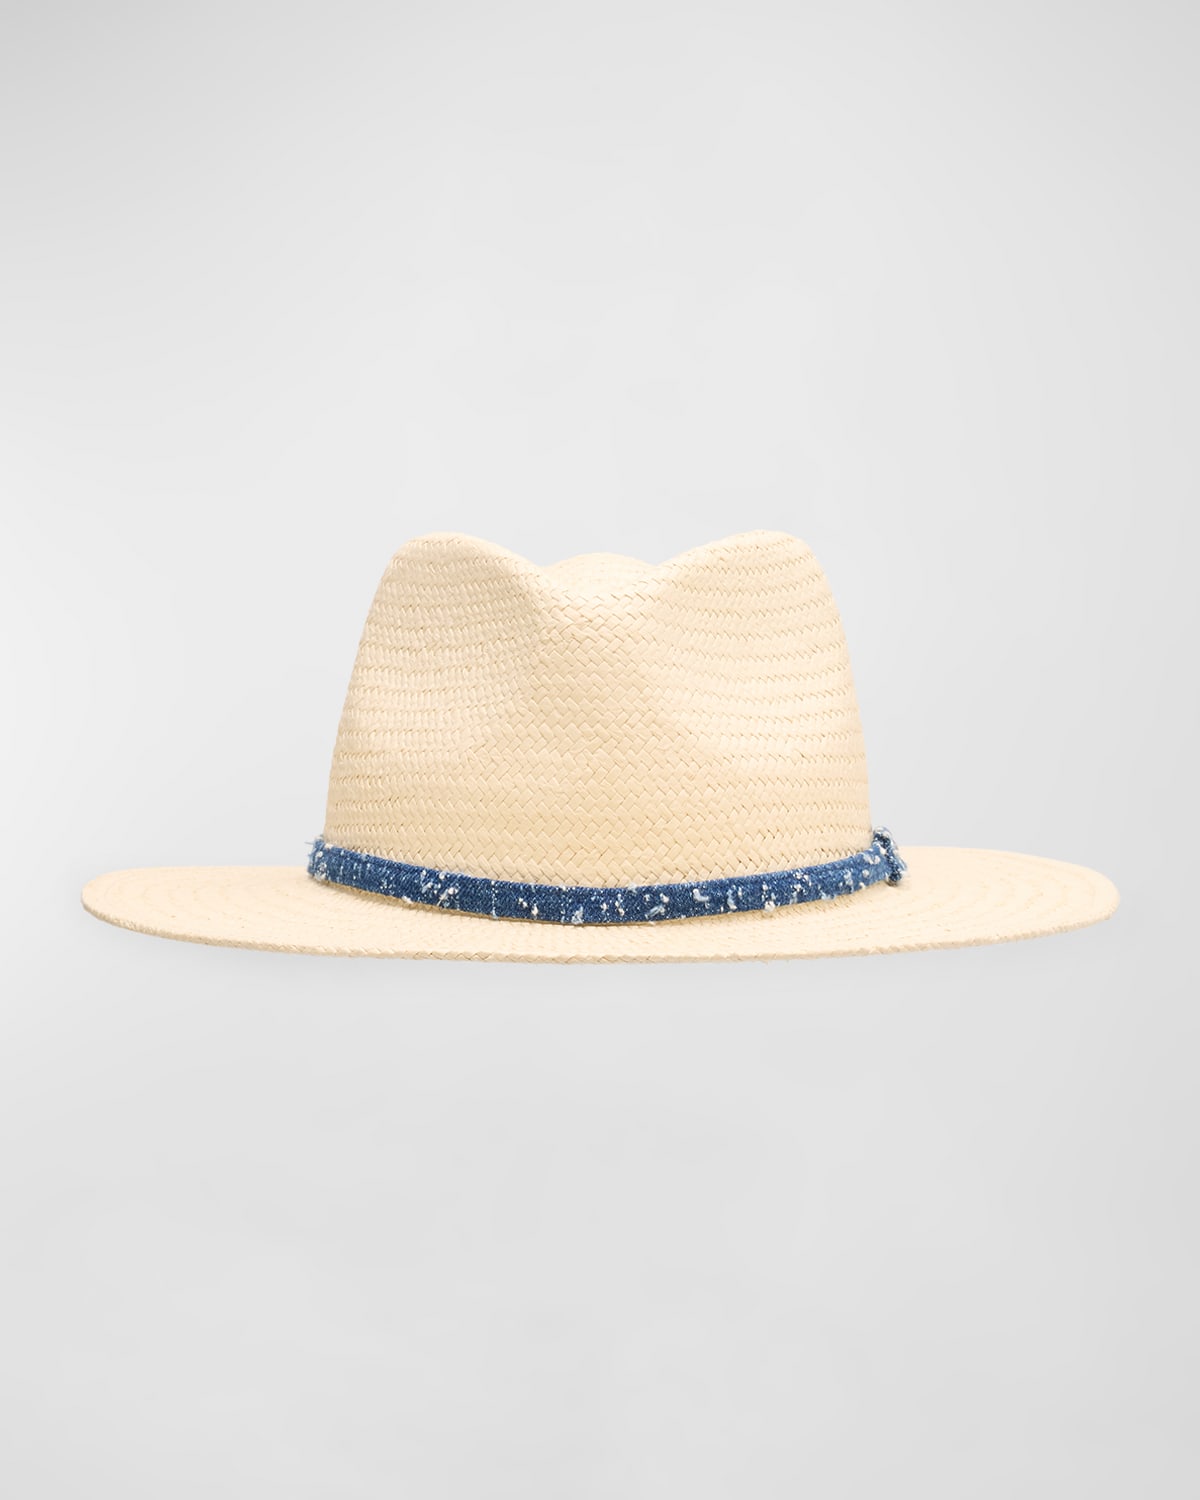 Packable Straw Fedora With Denim Band